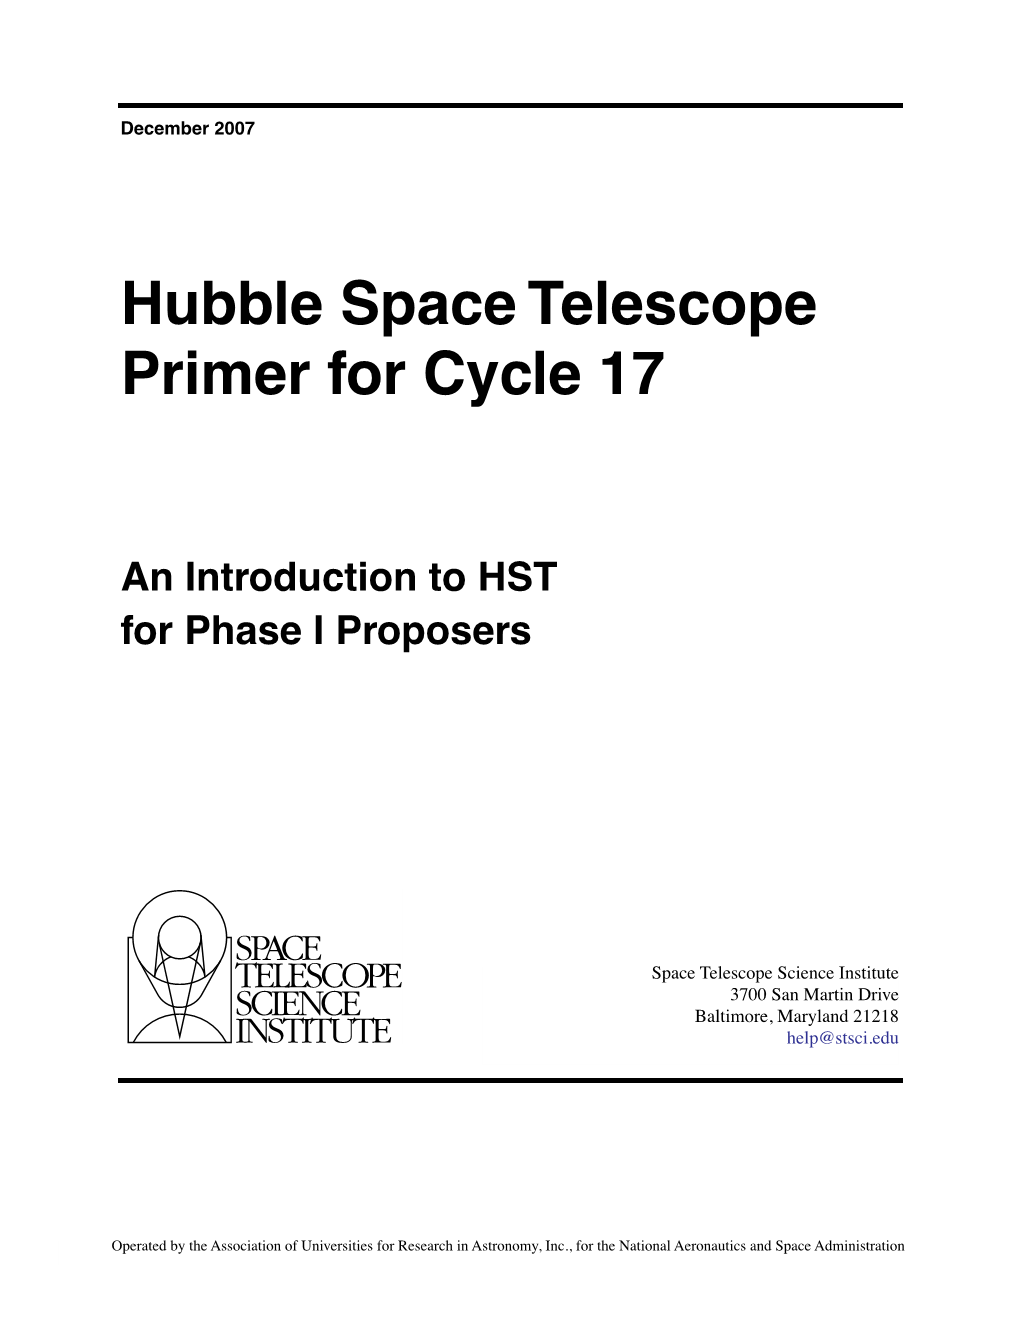 Hubble Space Telescope Primer for Cycle 17